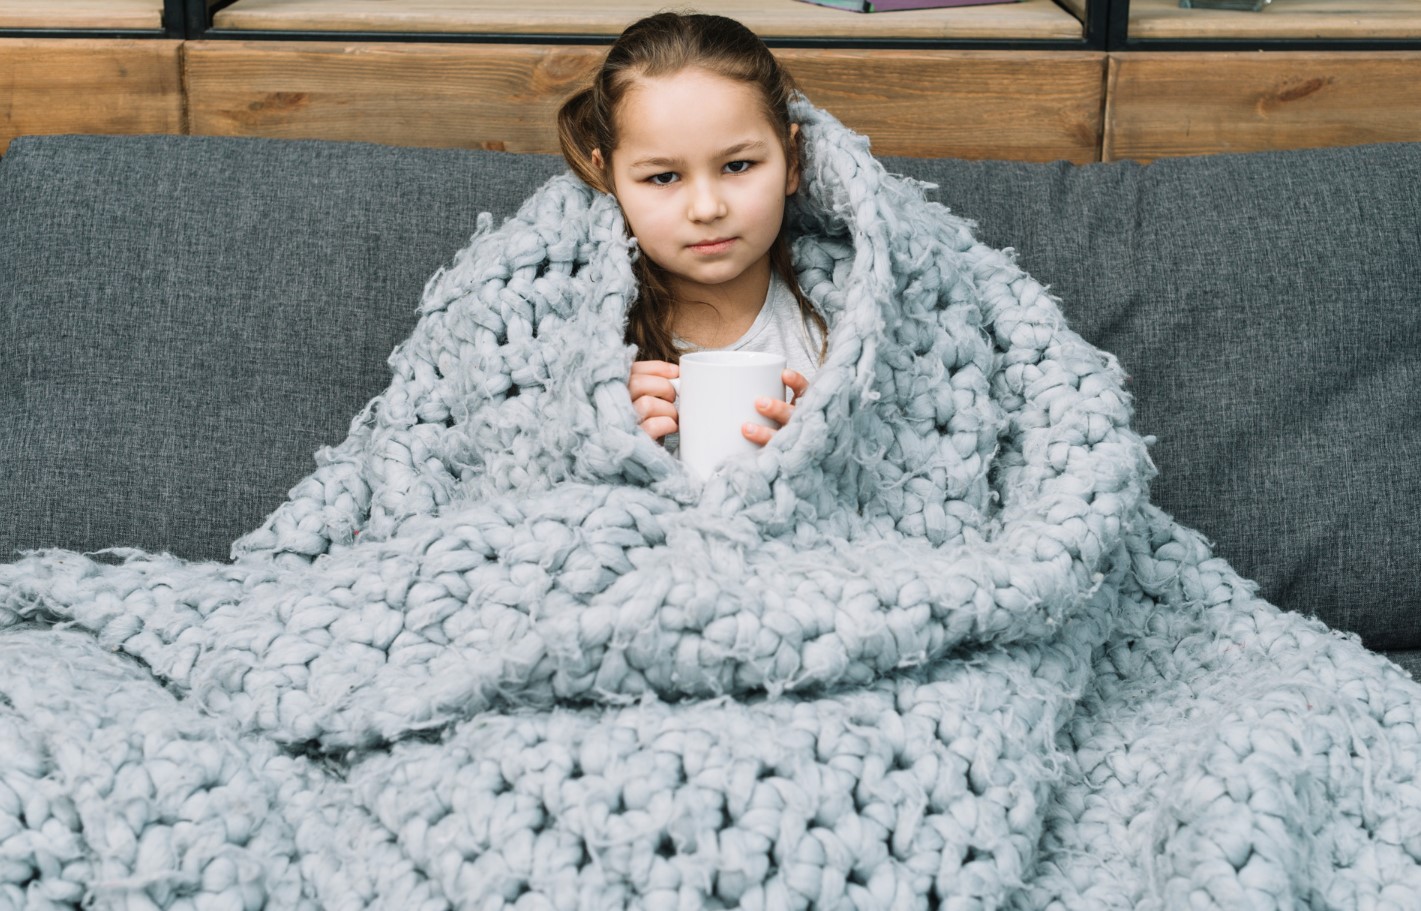 Benefits of weighted blankets for Children with Autism